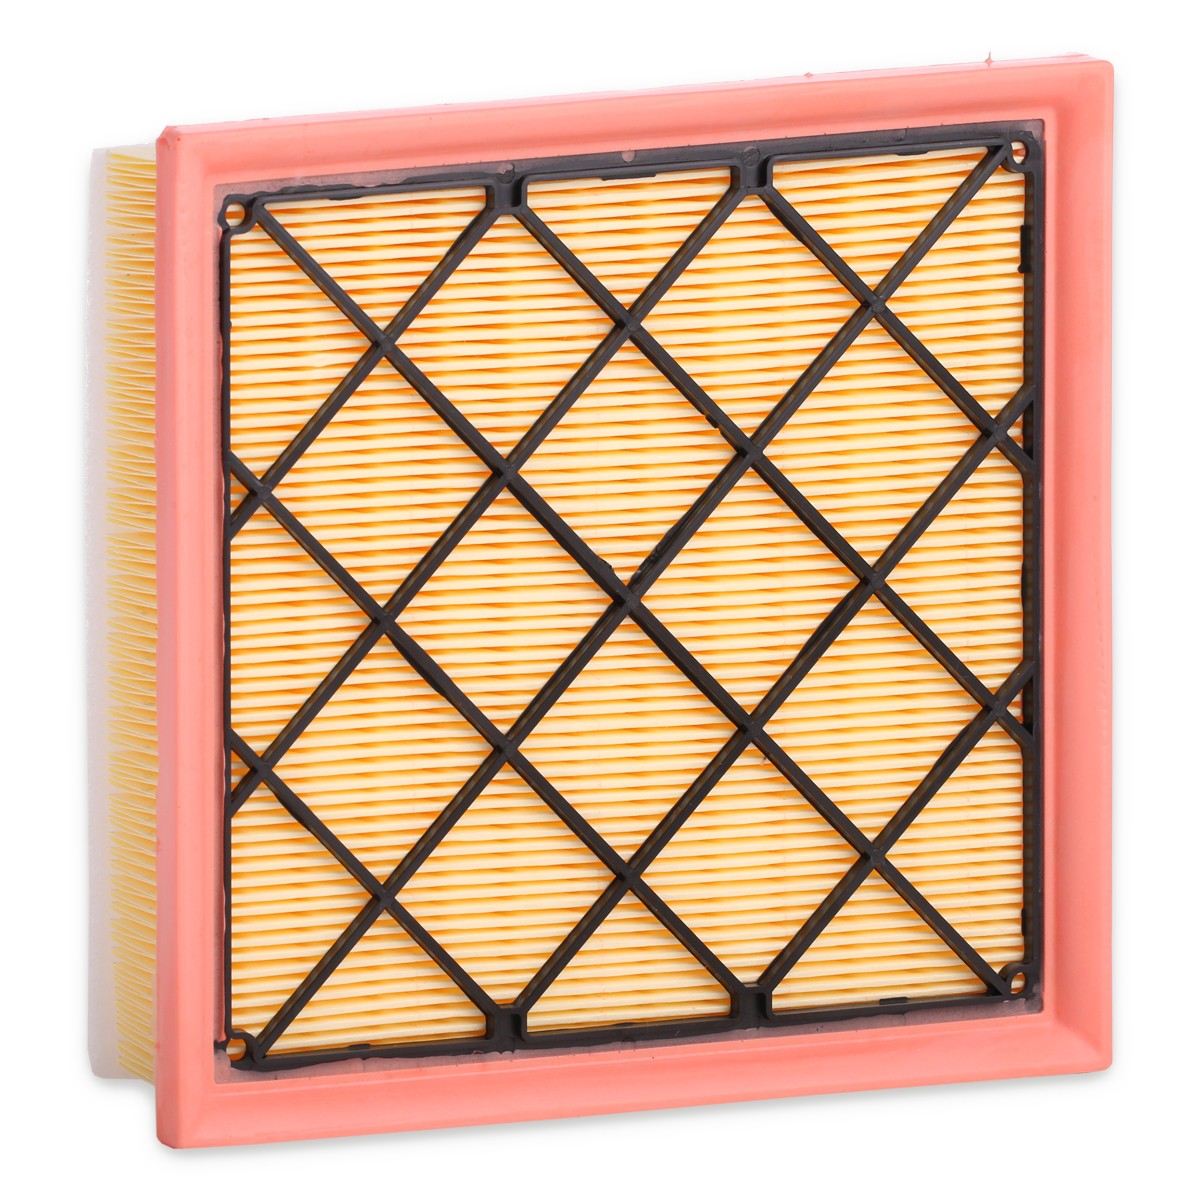 8A0515 Air filter 8A0515 RIDEX 68mm, 200mm, 208mm, Air Recirculation Filter, with integrated grille, with pre-filter